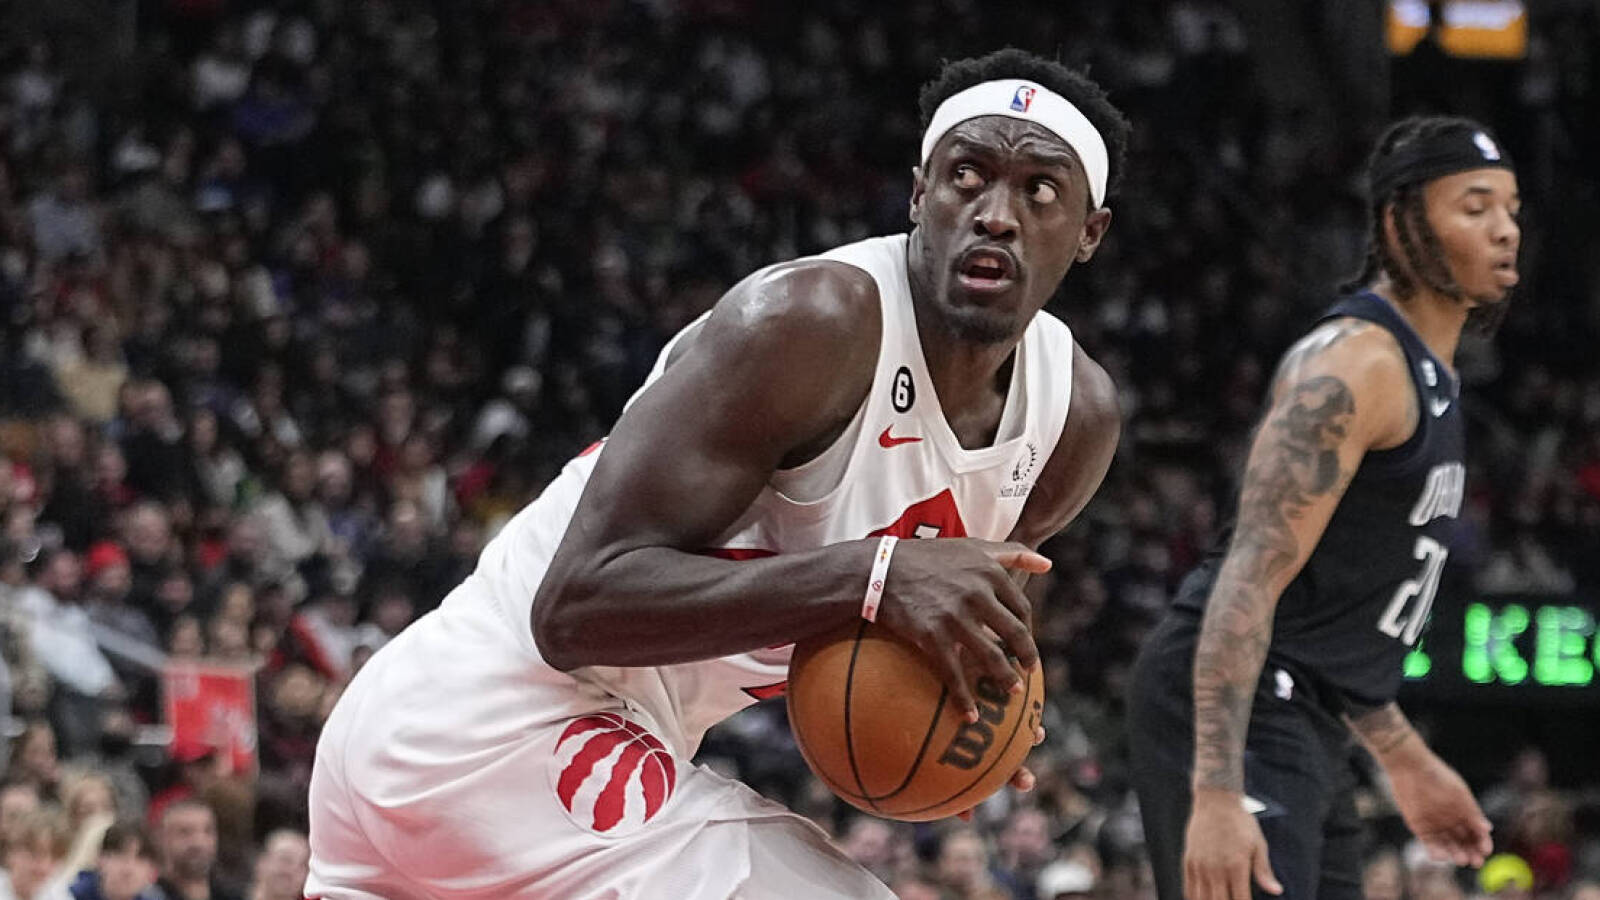 Raptors All-Star's Summer League no-show sparks trade speculation